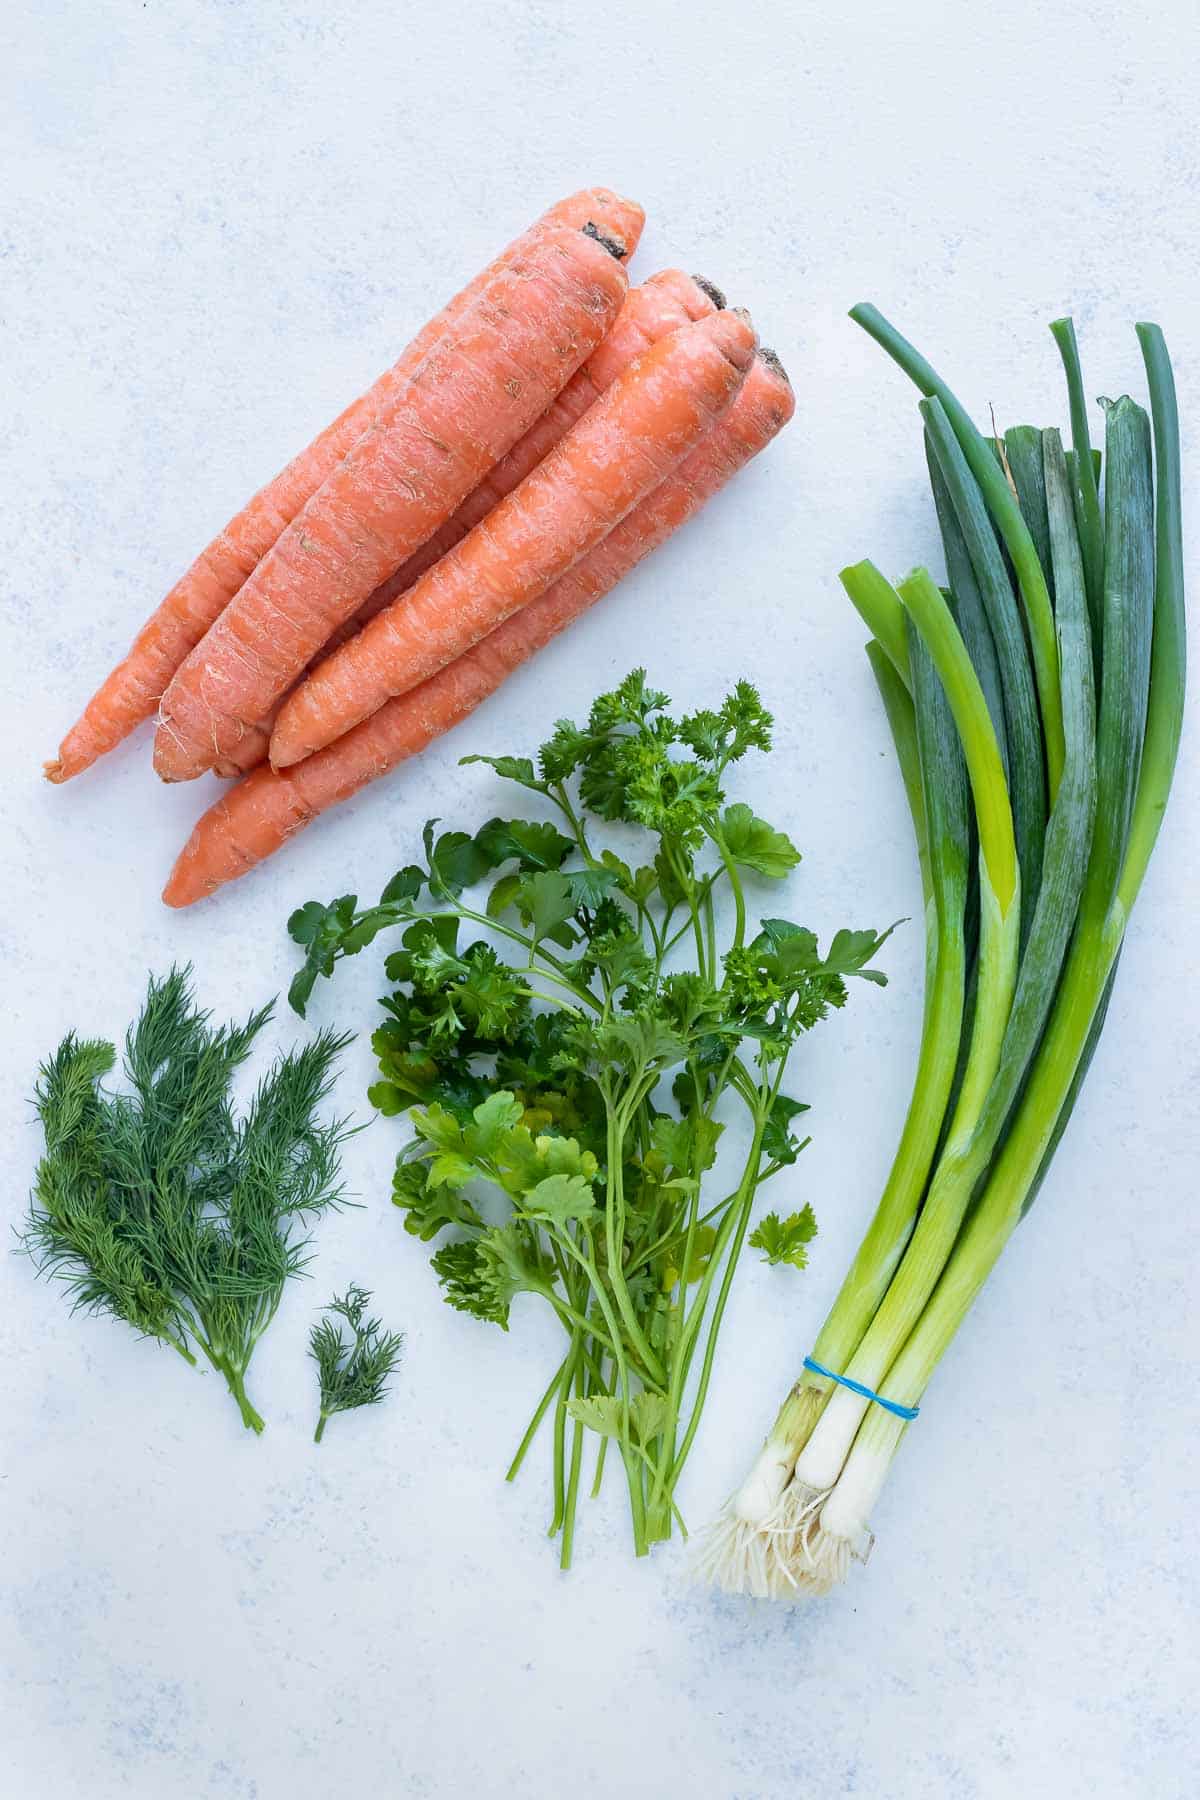 Carrots, green onions, dill, and parsley are ingredients that can be used in this recipe.